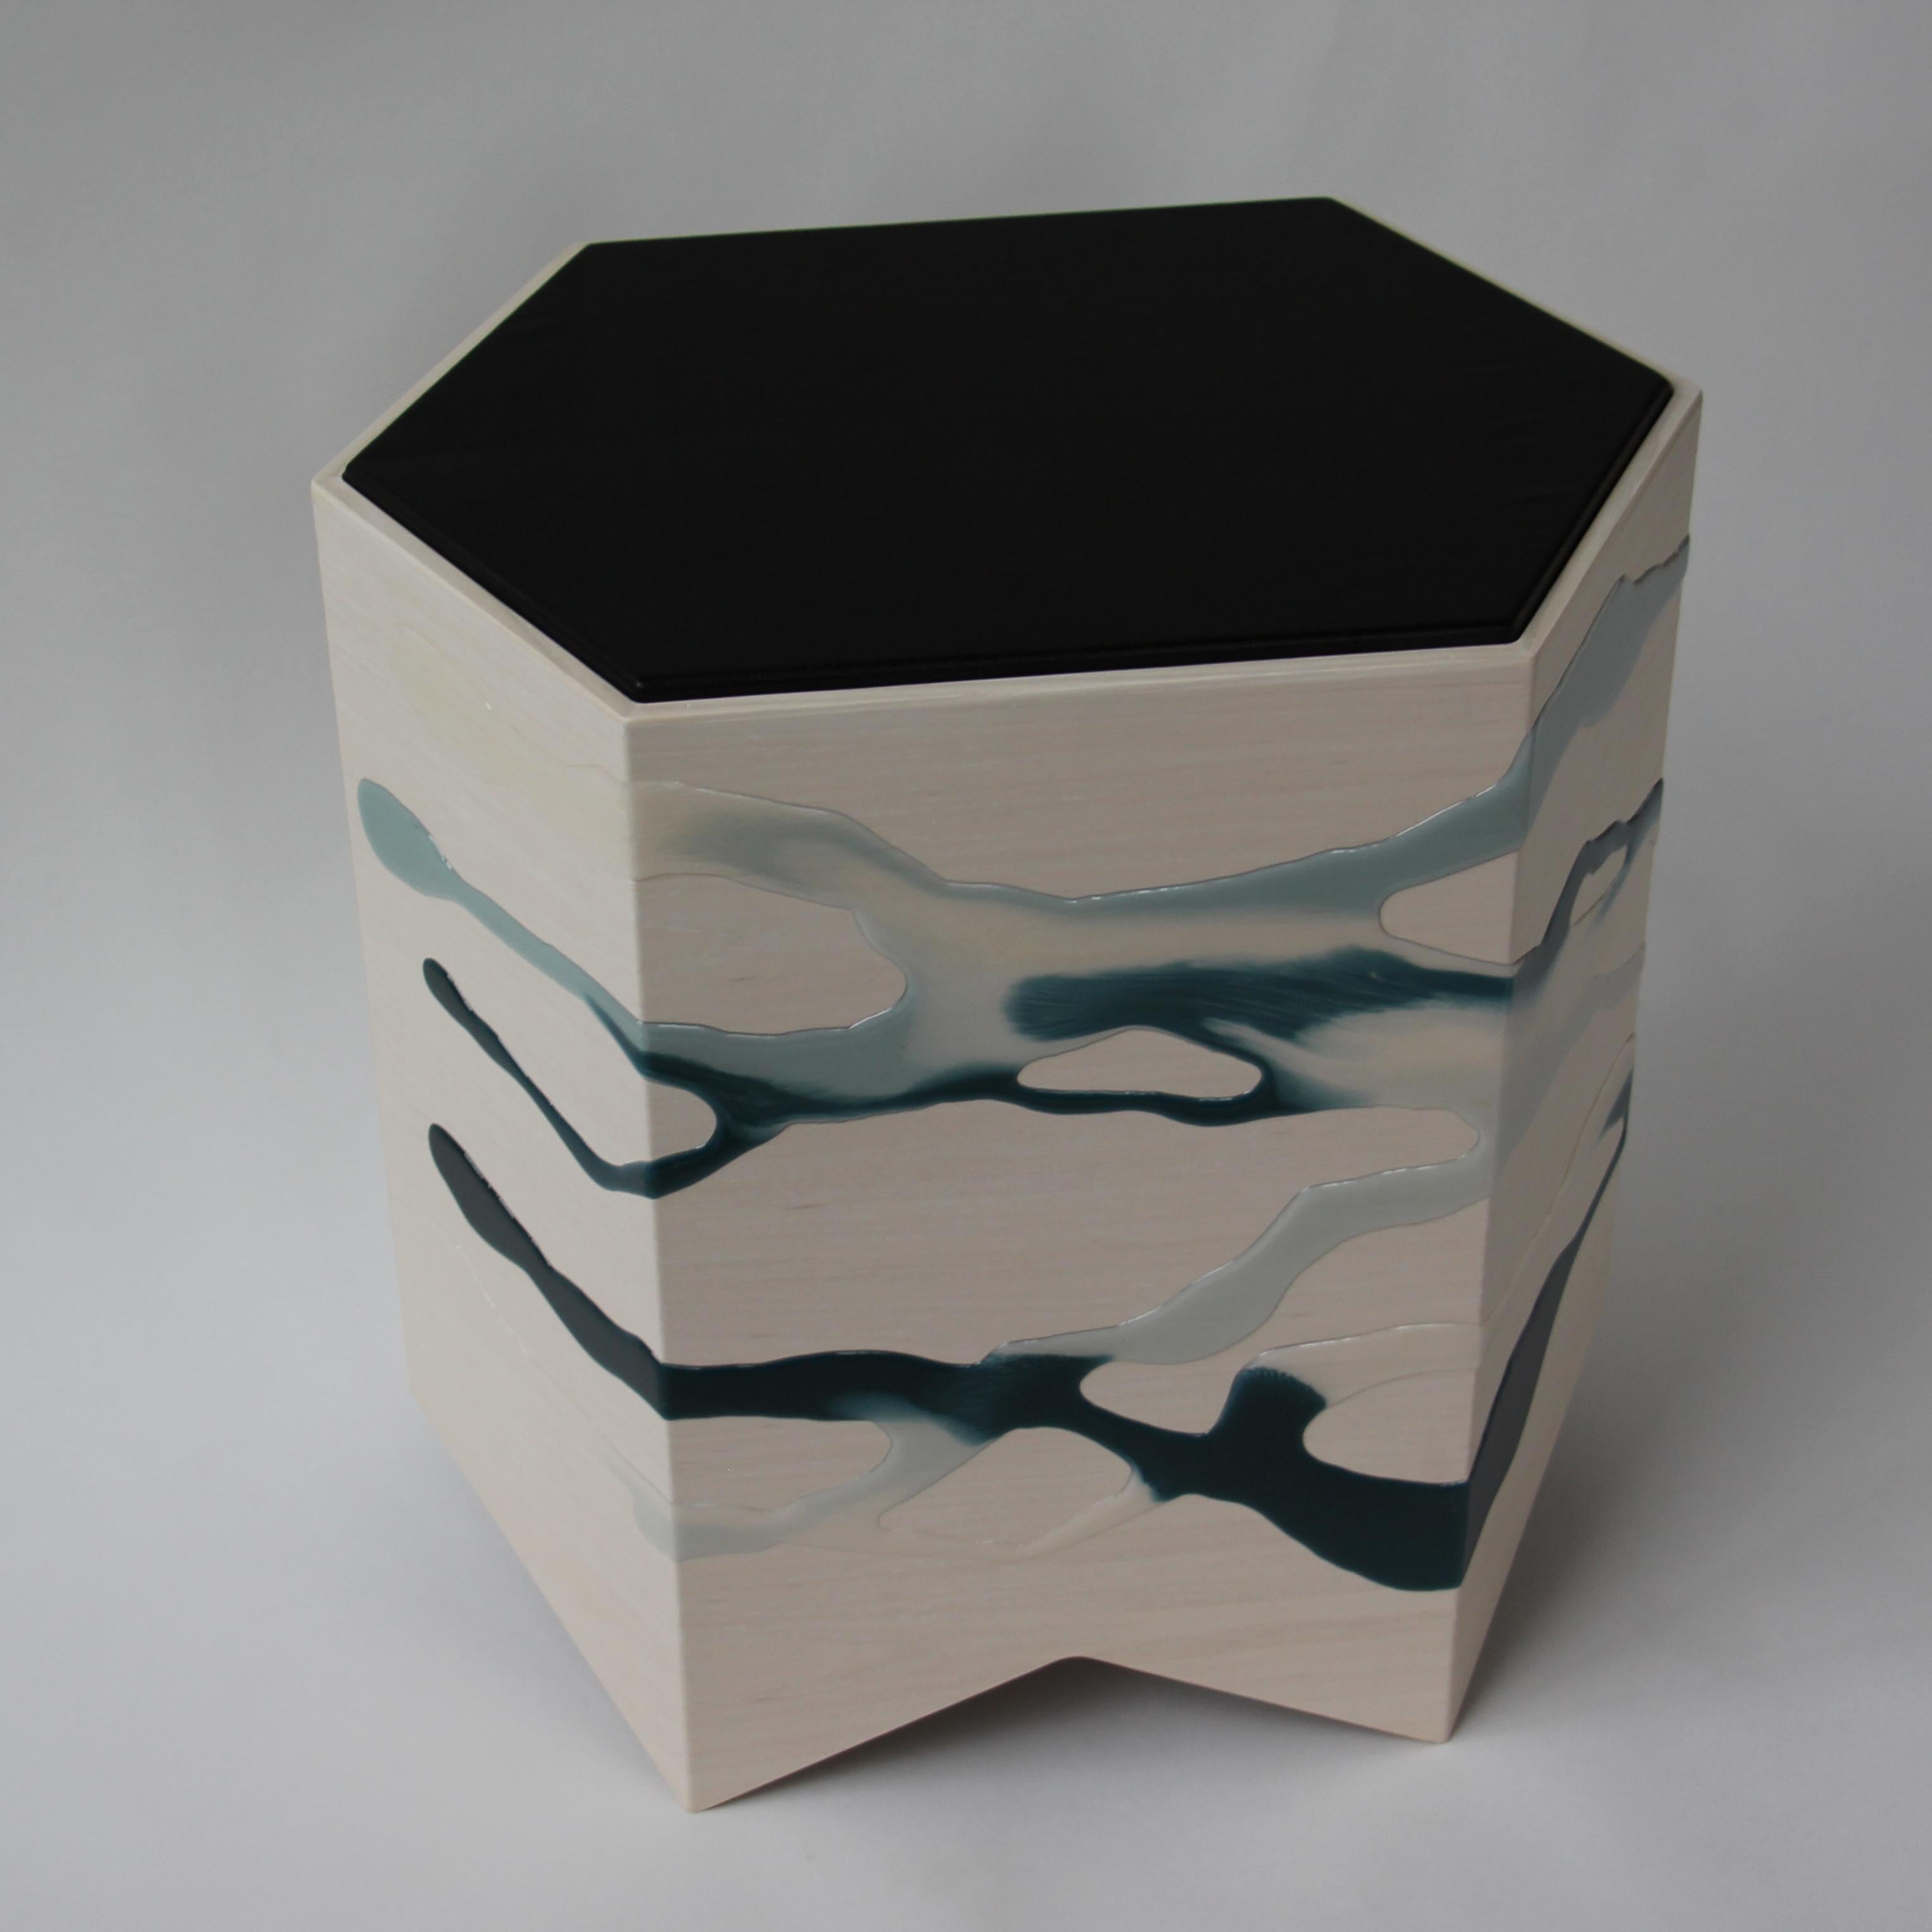 Glazed Drip/Fold Side Table Ash Plywood, Teal-Indigo Resin Black Vinyl Top - IN STOCK For Sale